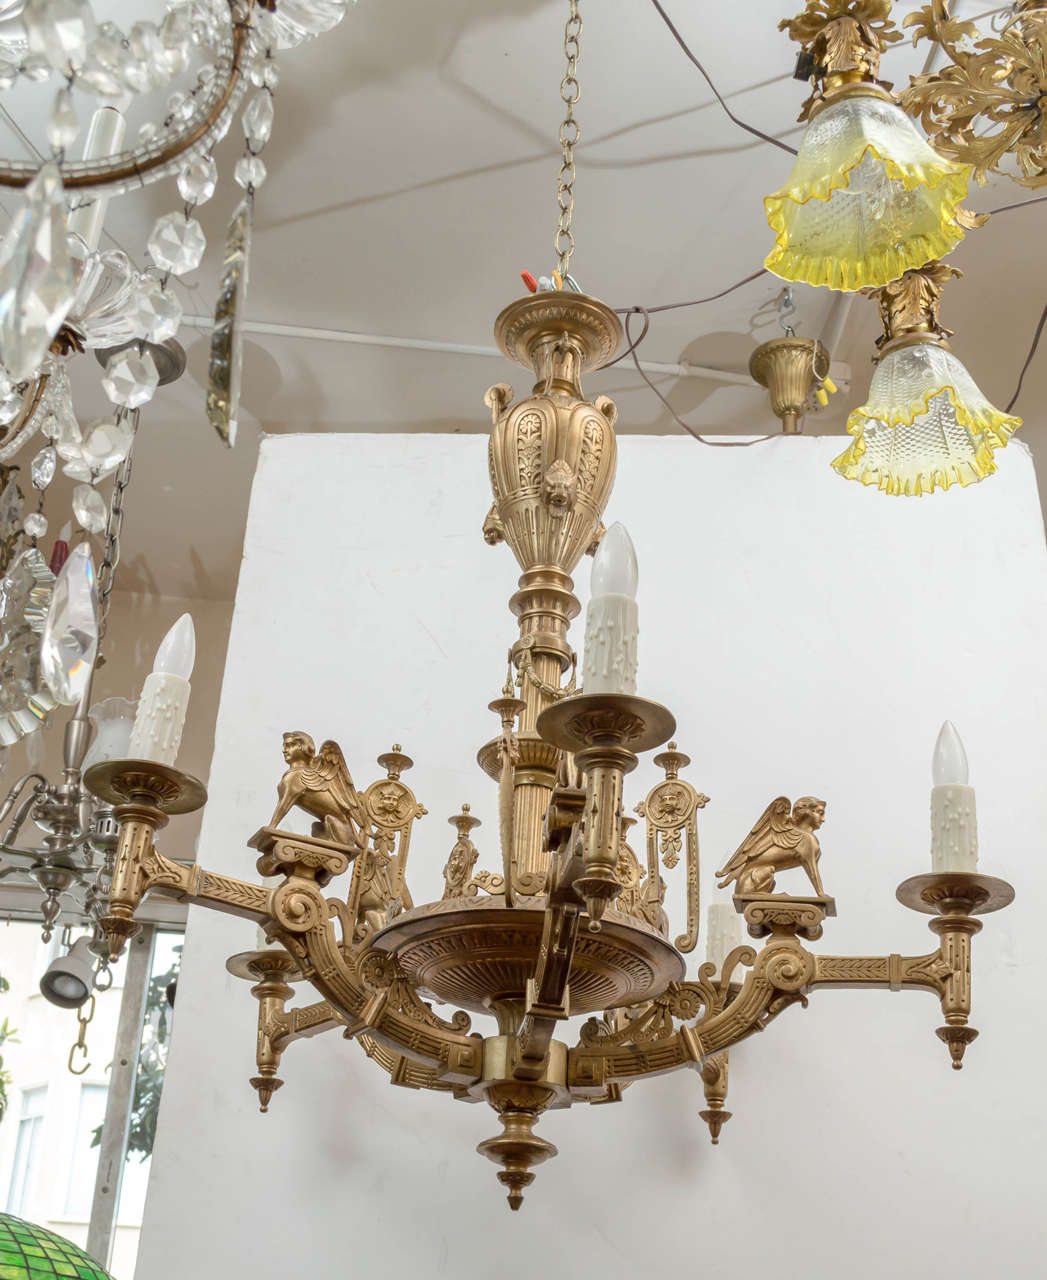 This superbly cast gilt bronze chandelier offers the best of the desirable Egyptian Revival elements. Newly wired and ready to hang. Certainly one of our finest pieces of antique lighting.